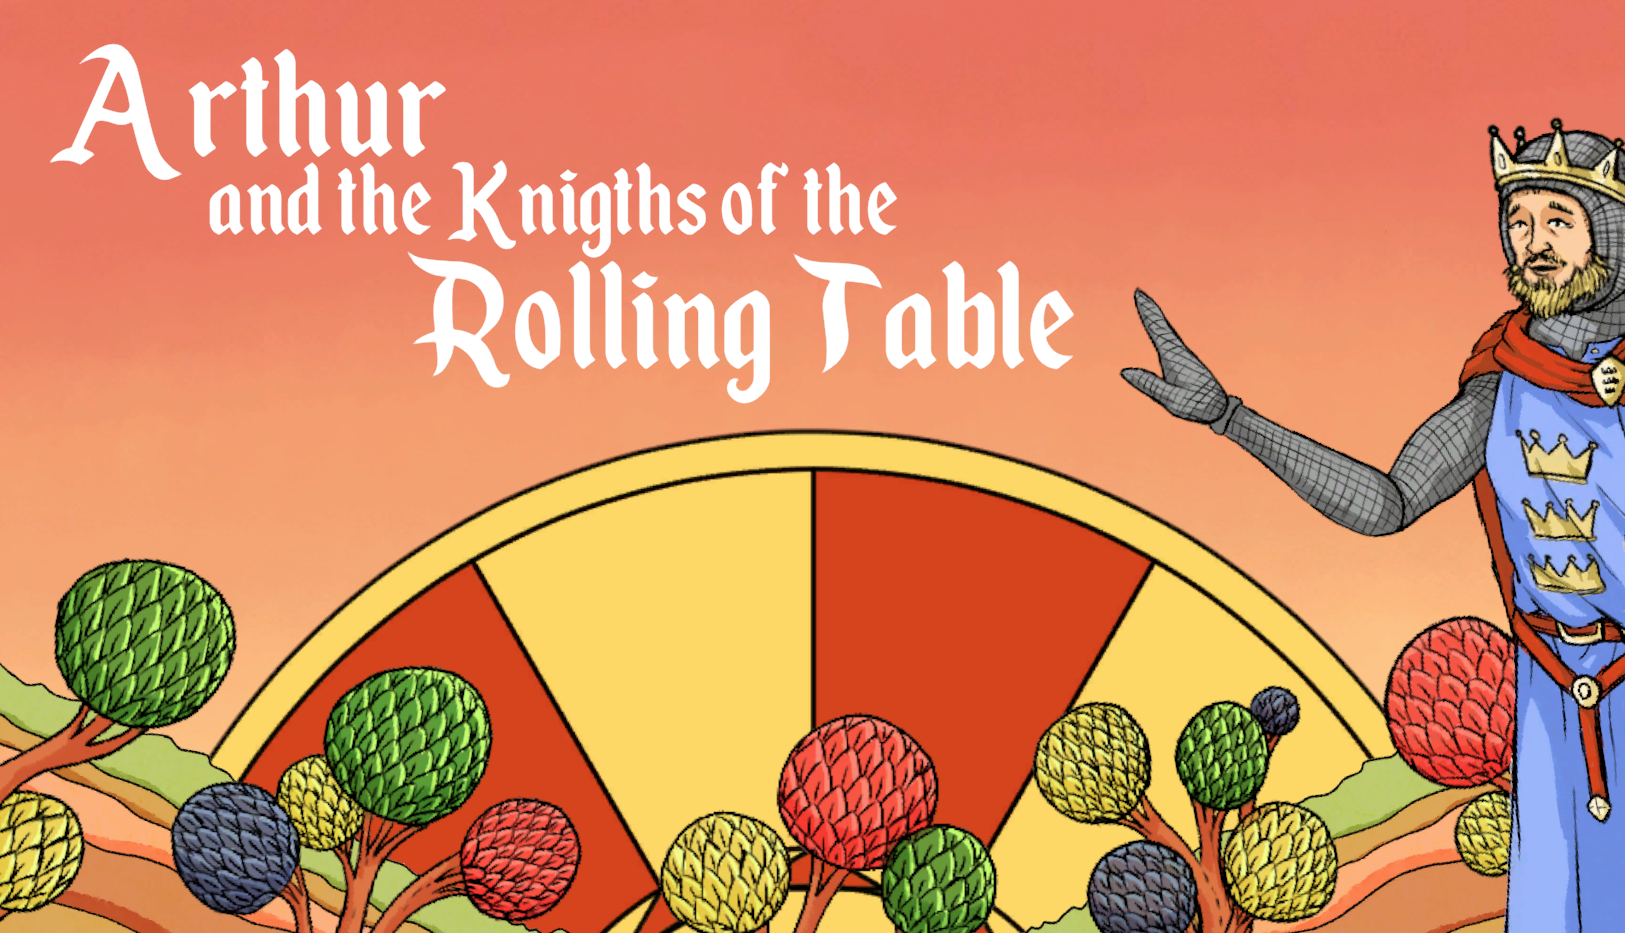 King Arthur and the Knights of the Rolling Table